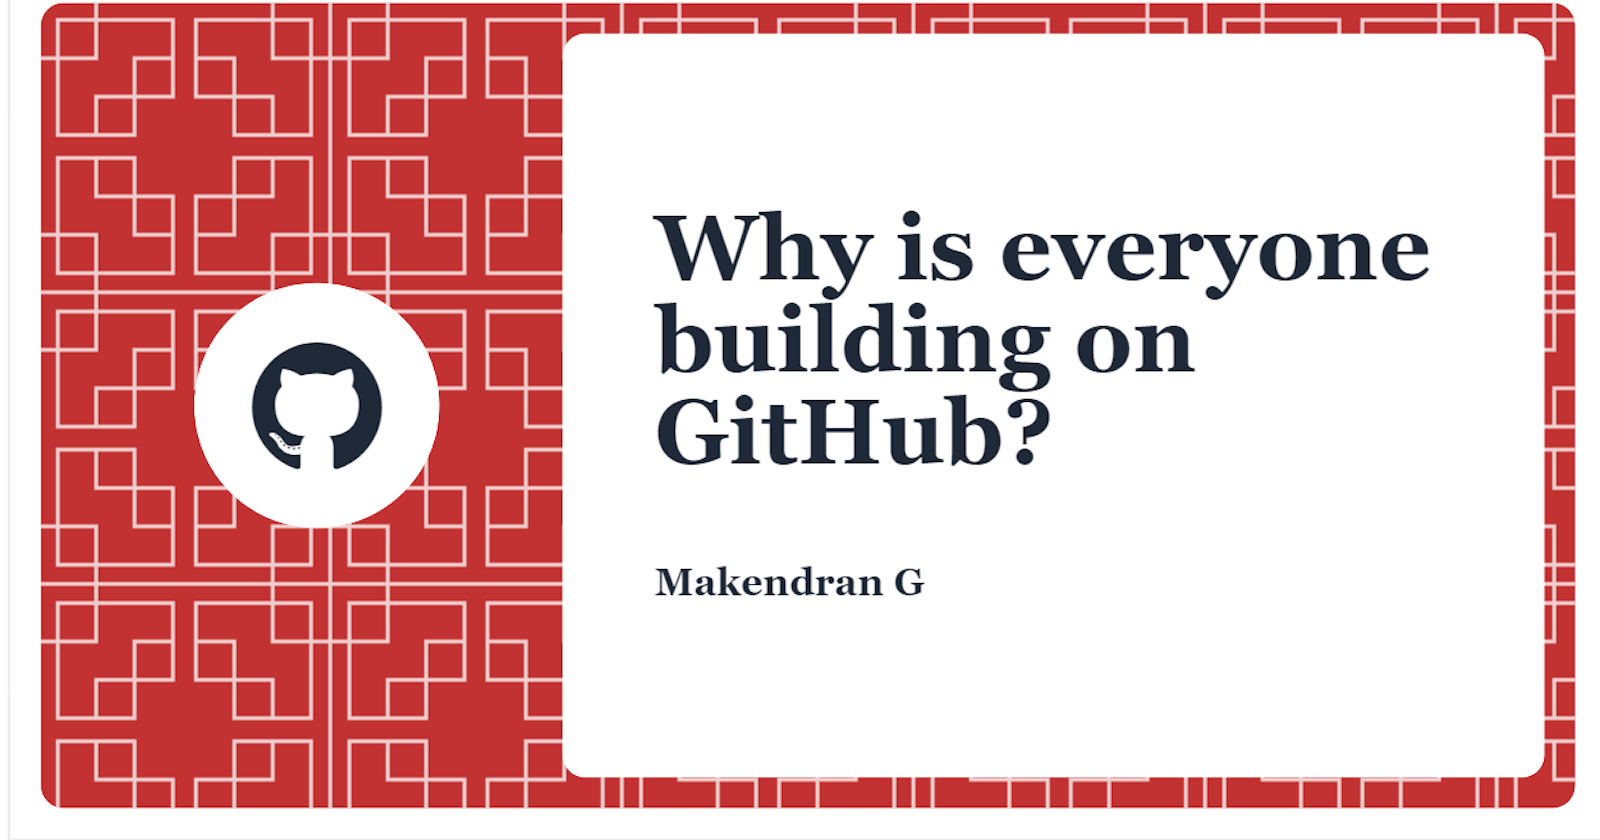 Why is everyone building on GitHub?